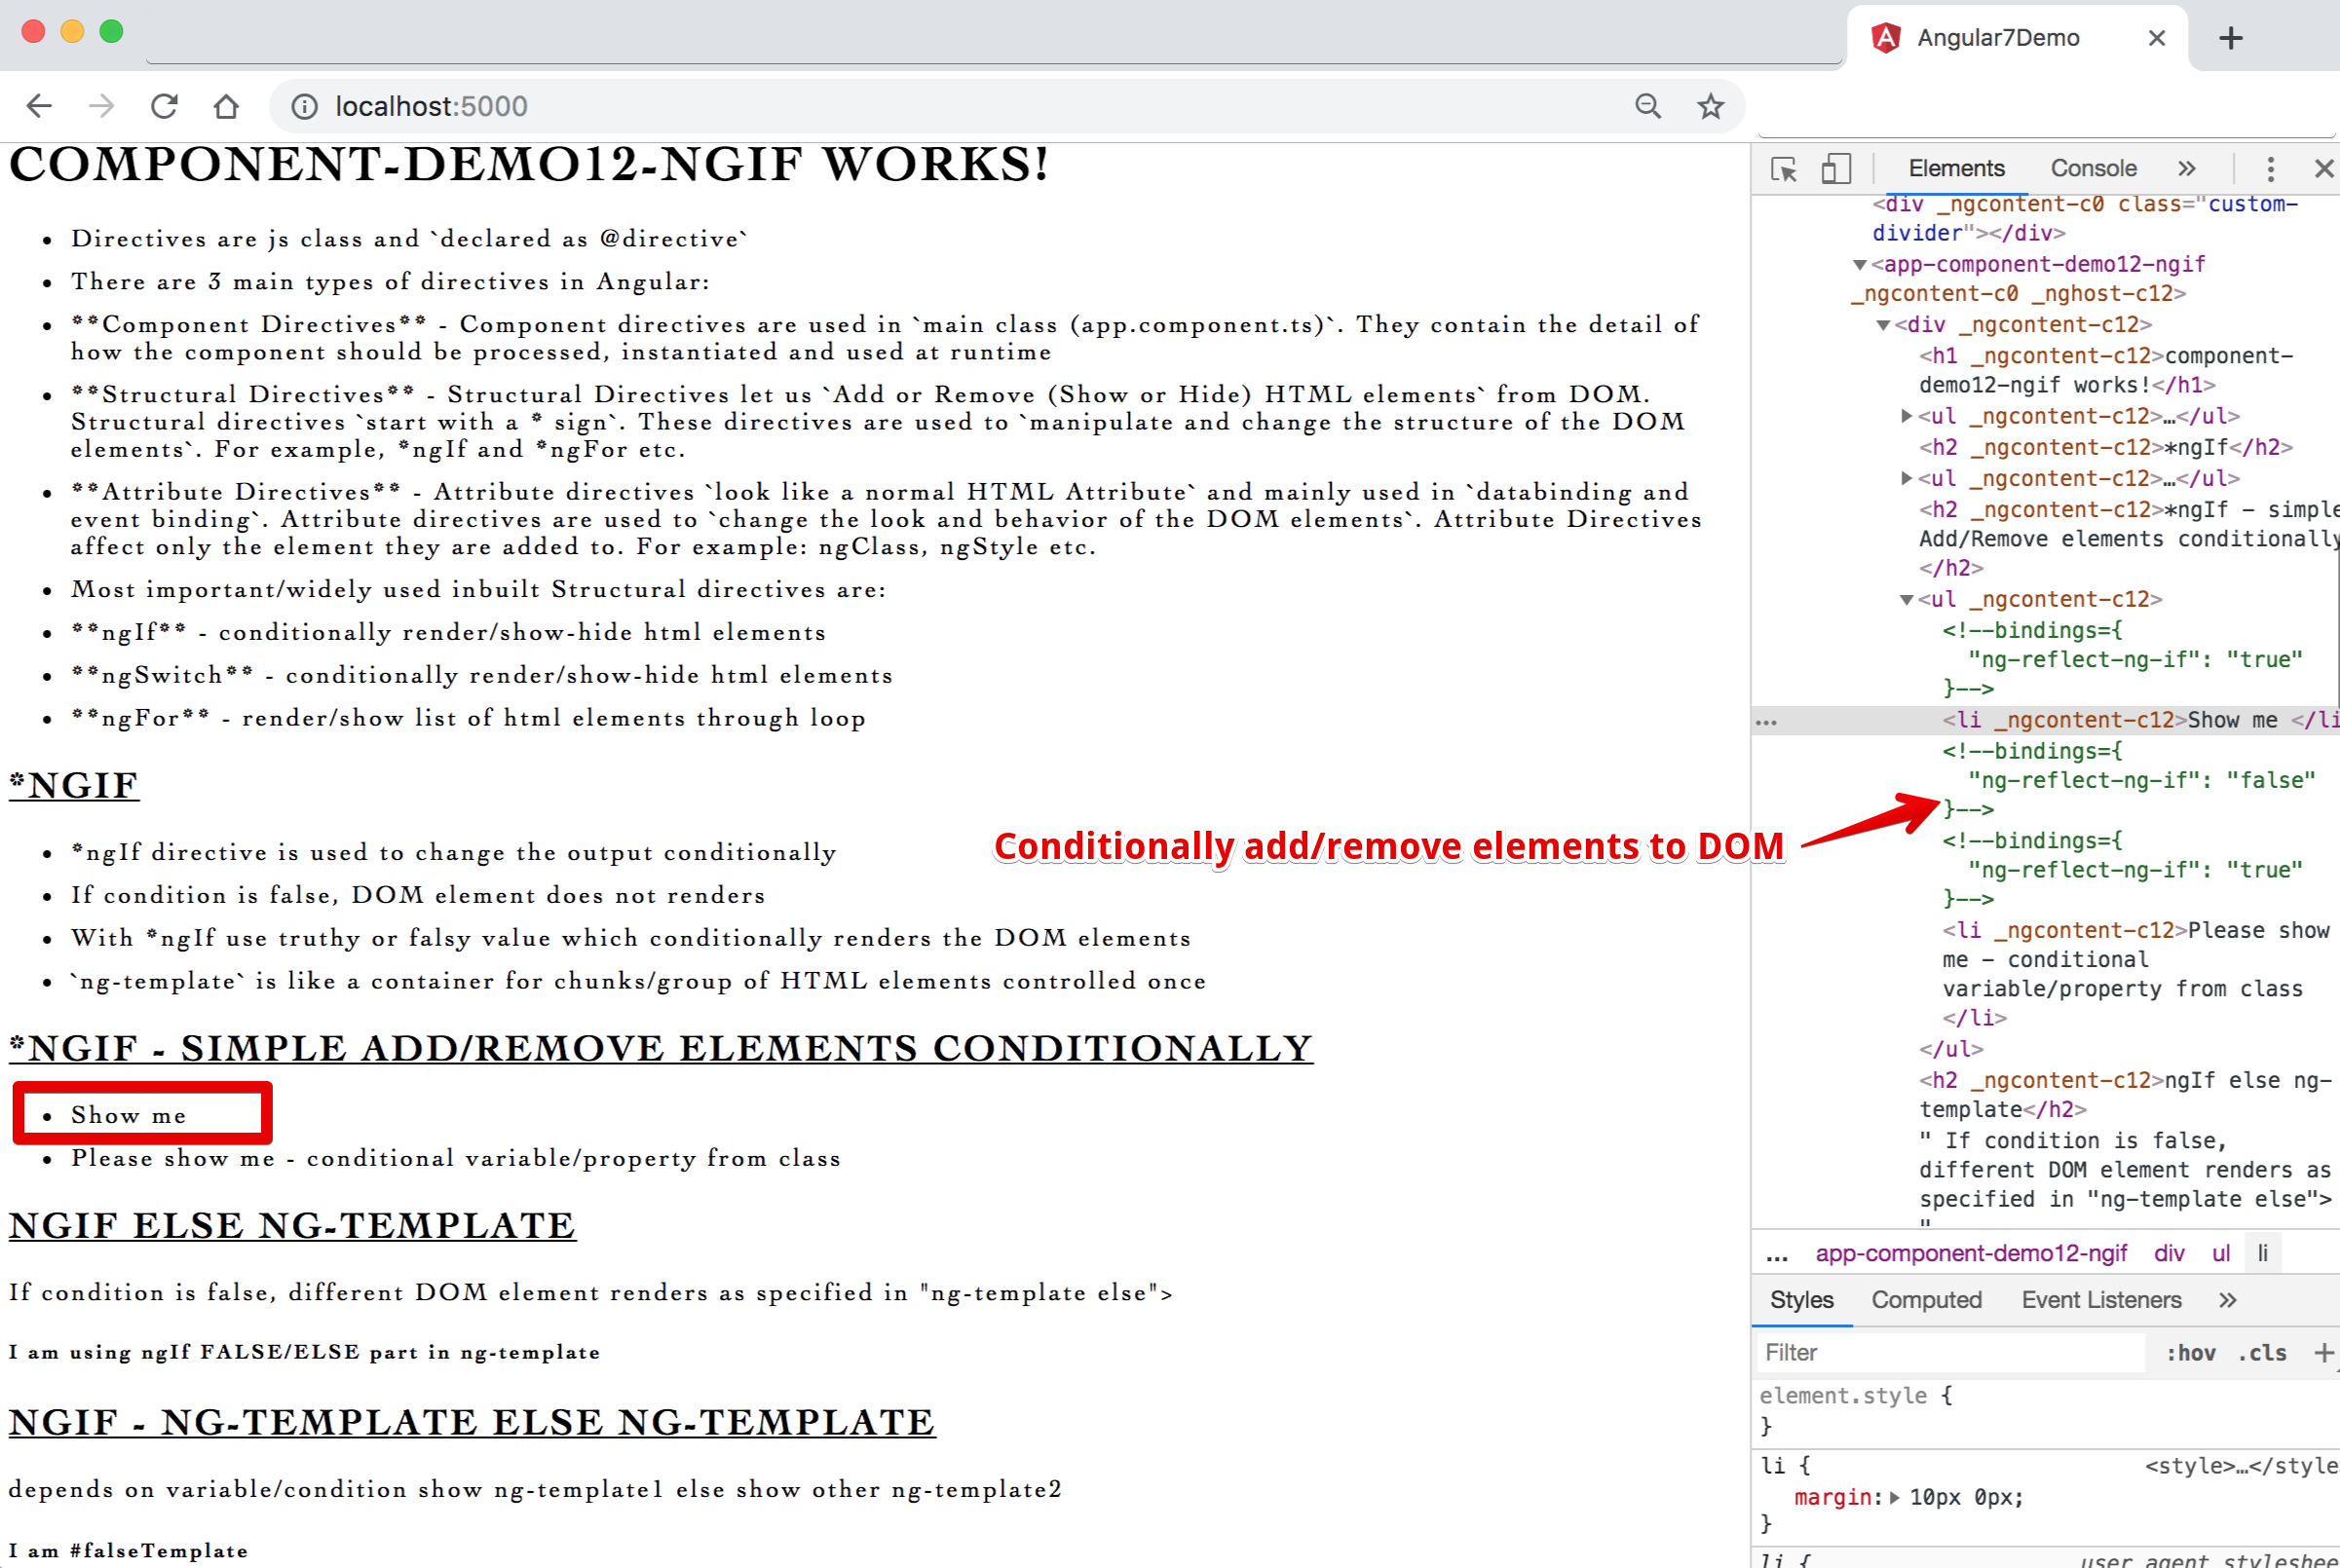 Image - Output - *ngIf - Structural directive to control/add/remove elements to DOM conditionally